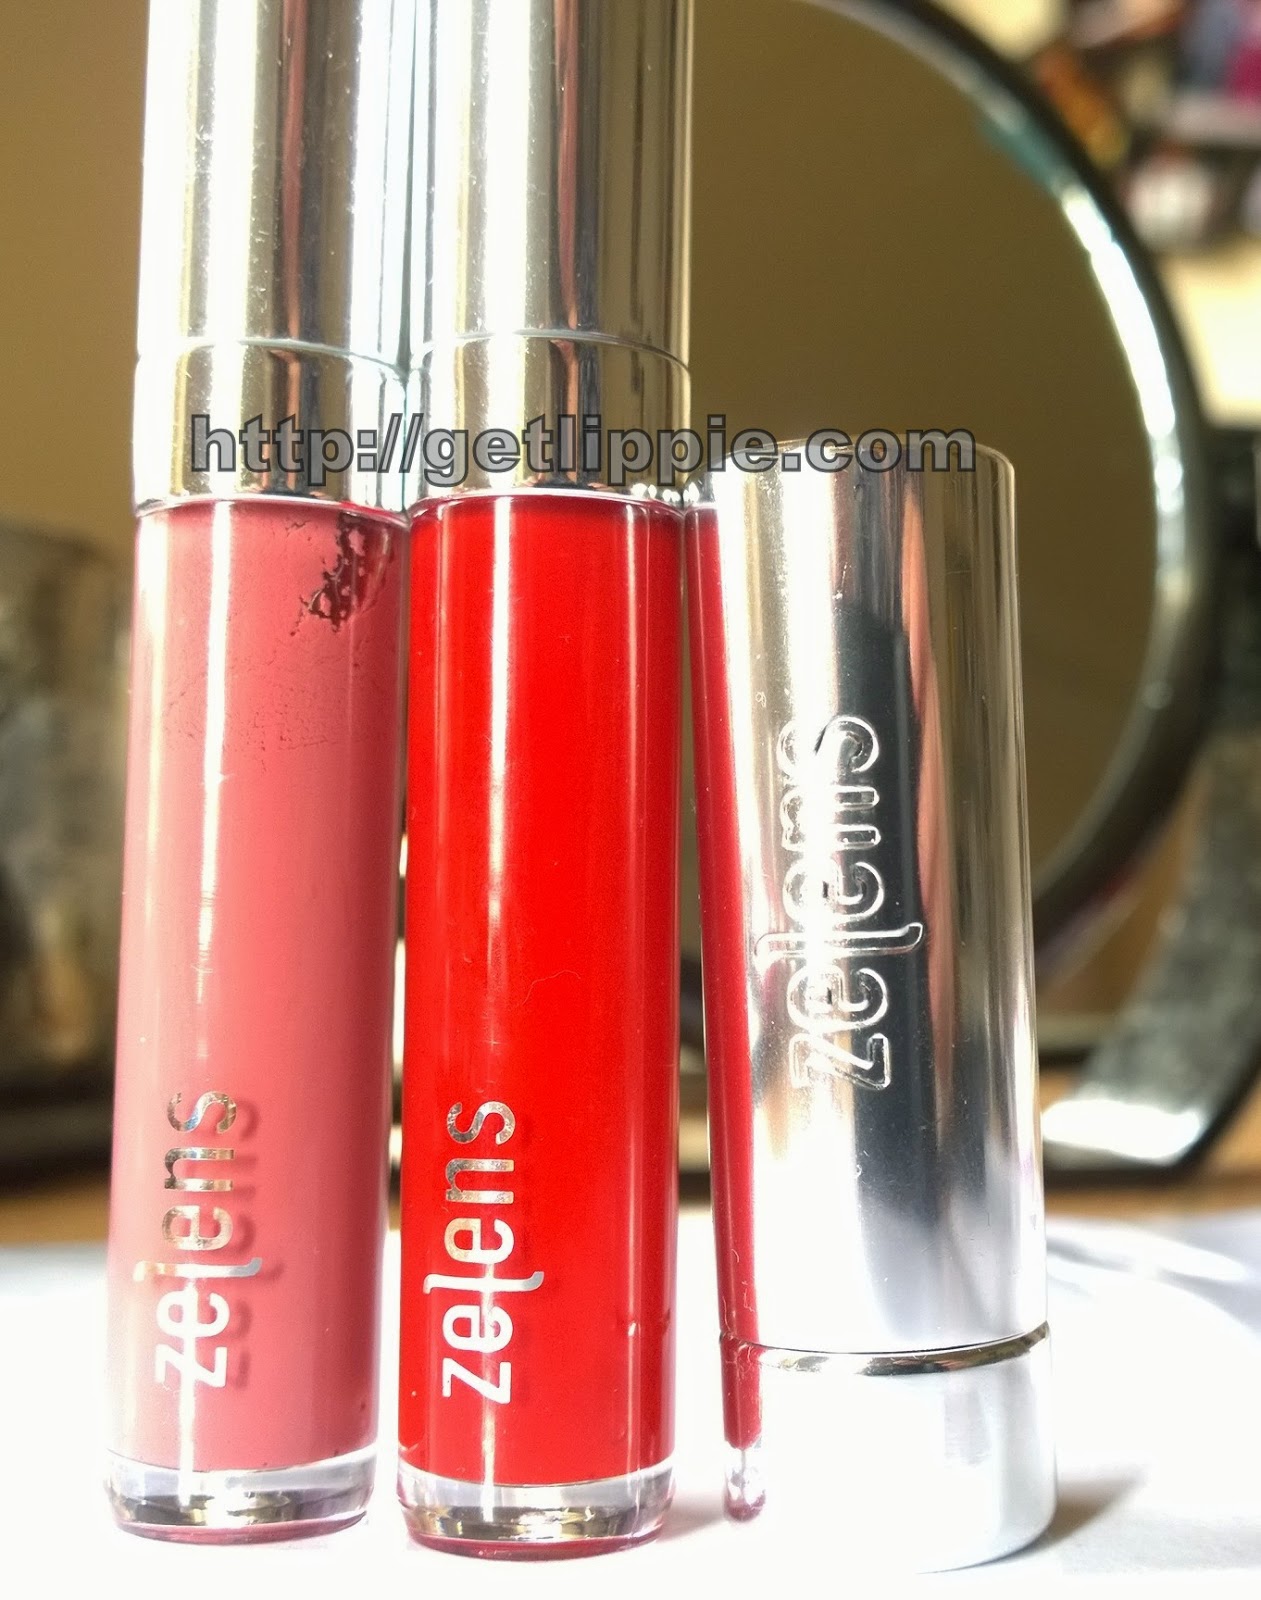 Zelens Lip Enhancer and Lip Glaze in Rouge and Nude